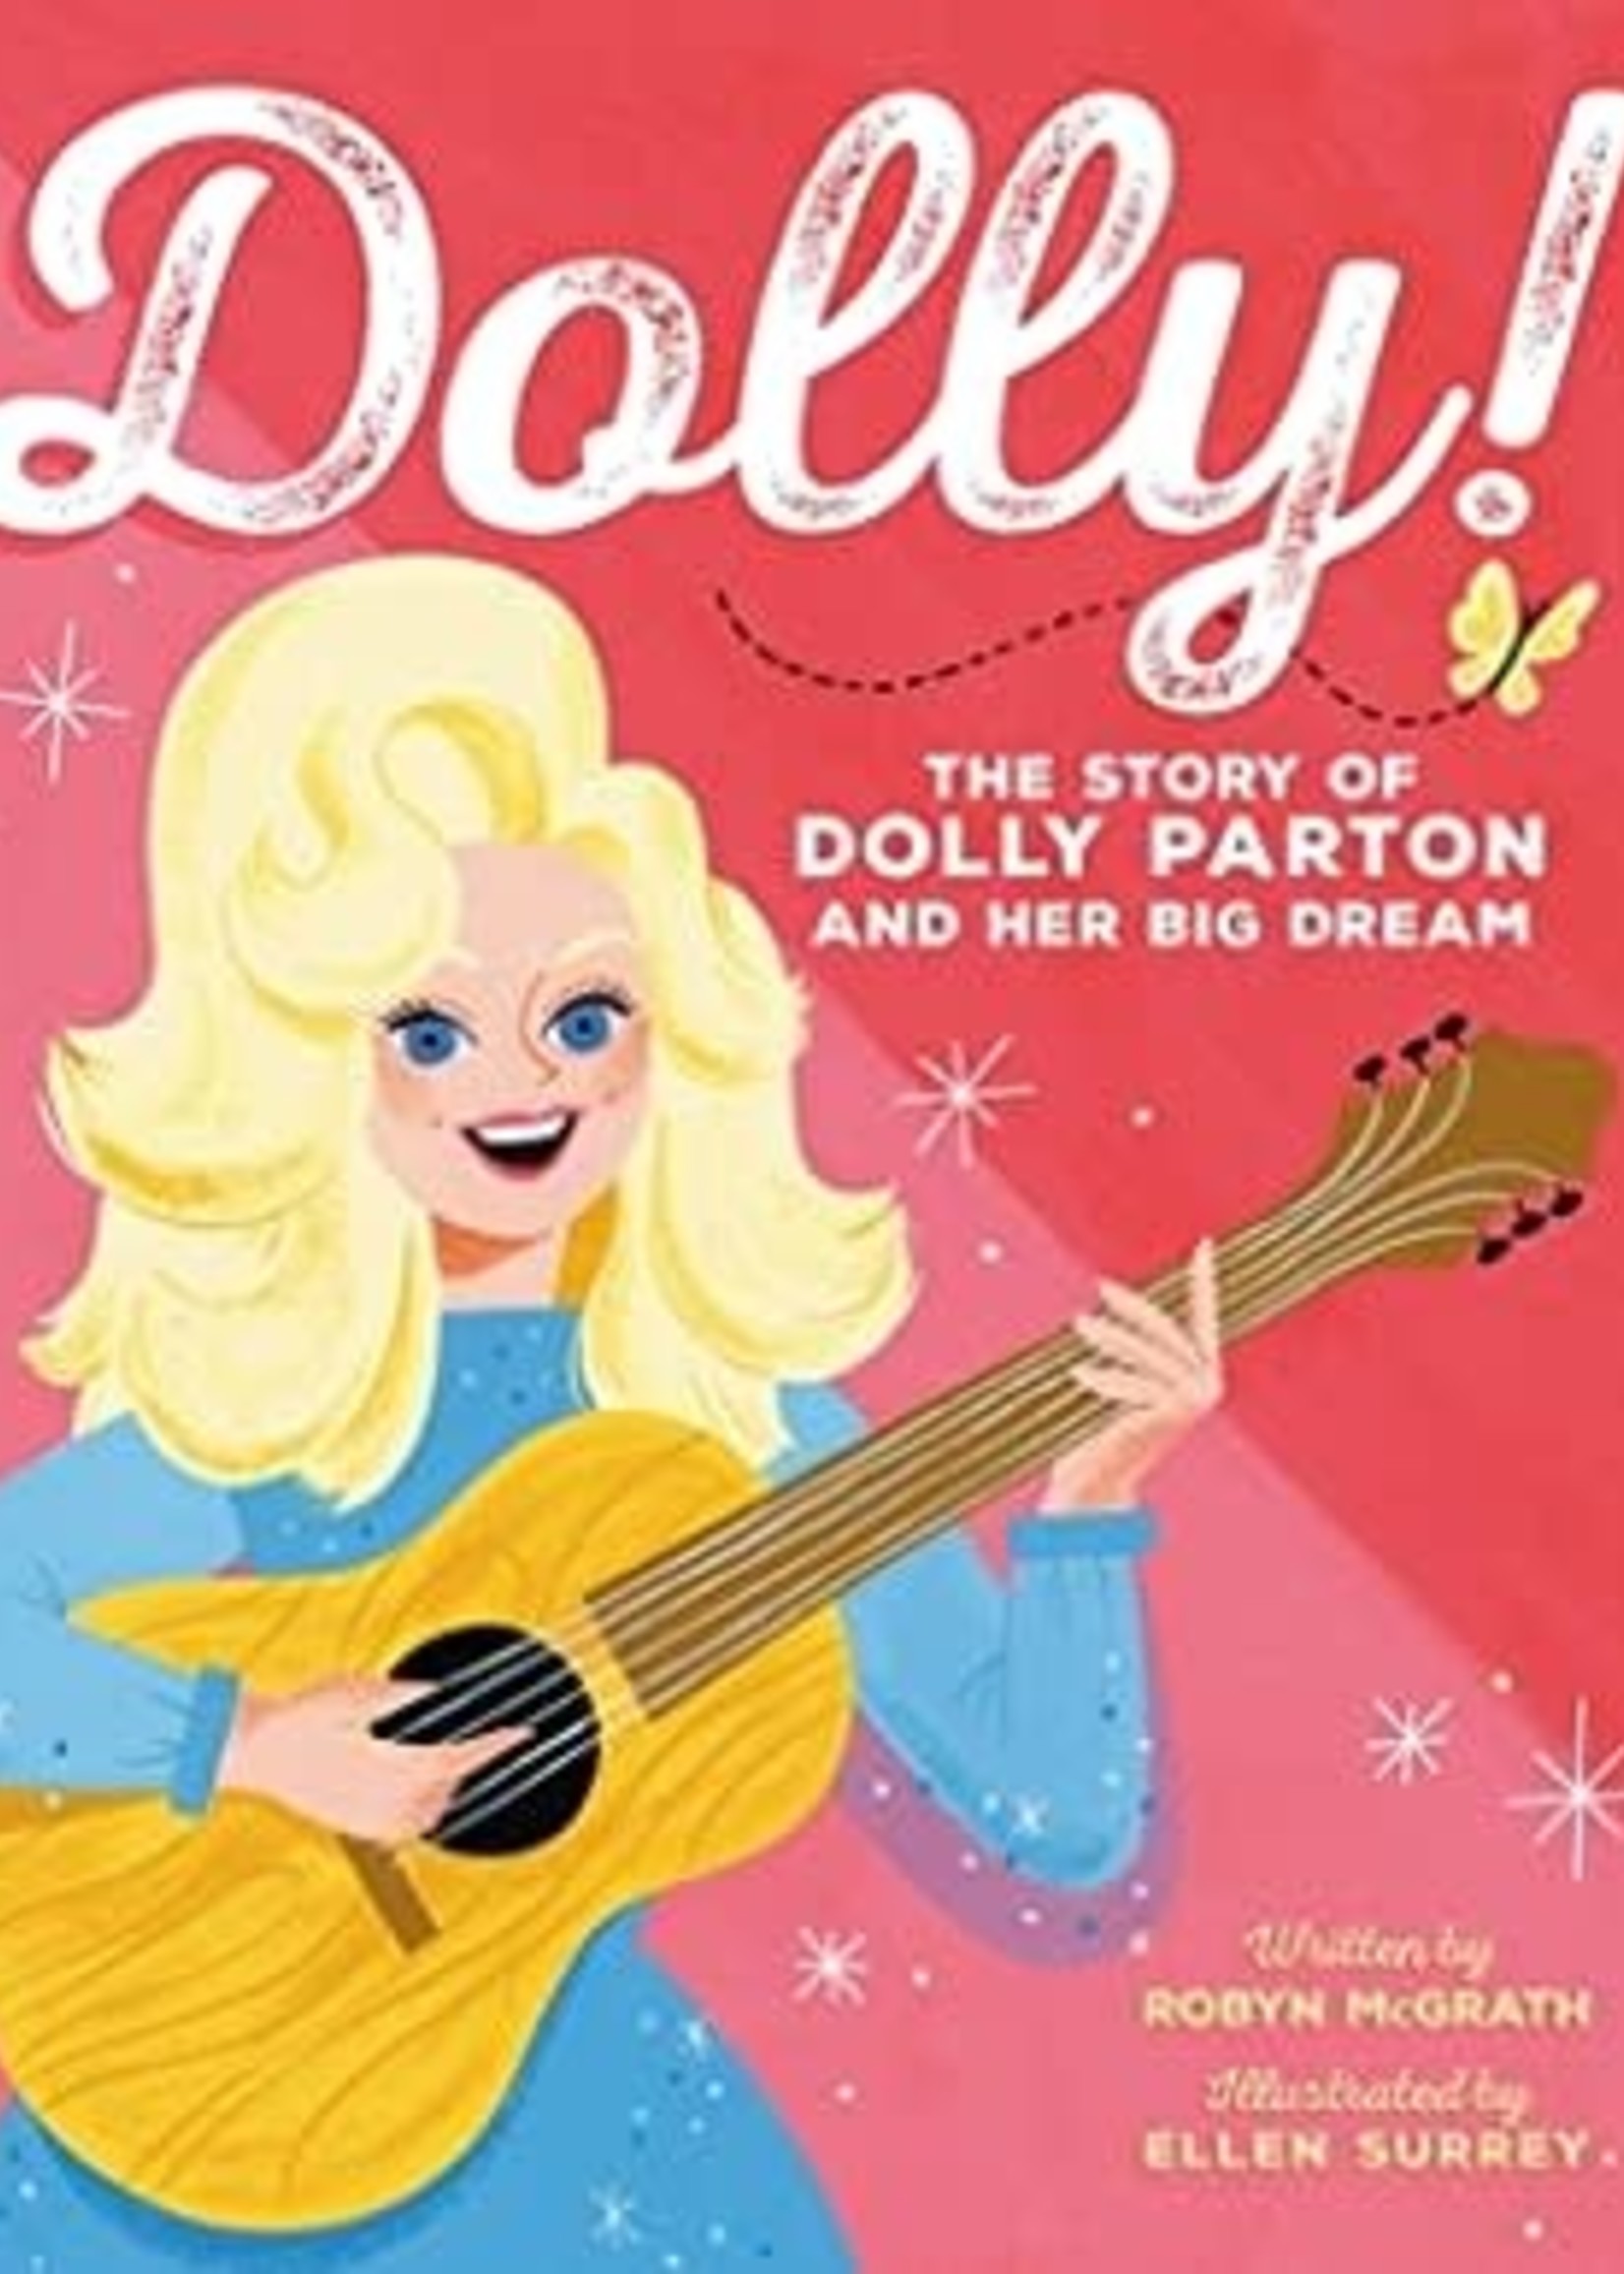 Dolly!: The Story of Dolly Parton and Her Big Dream by Robyn McGrath